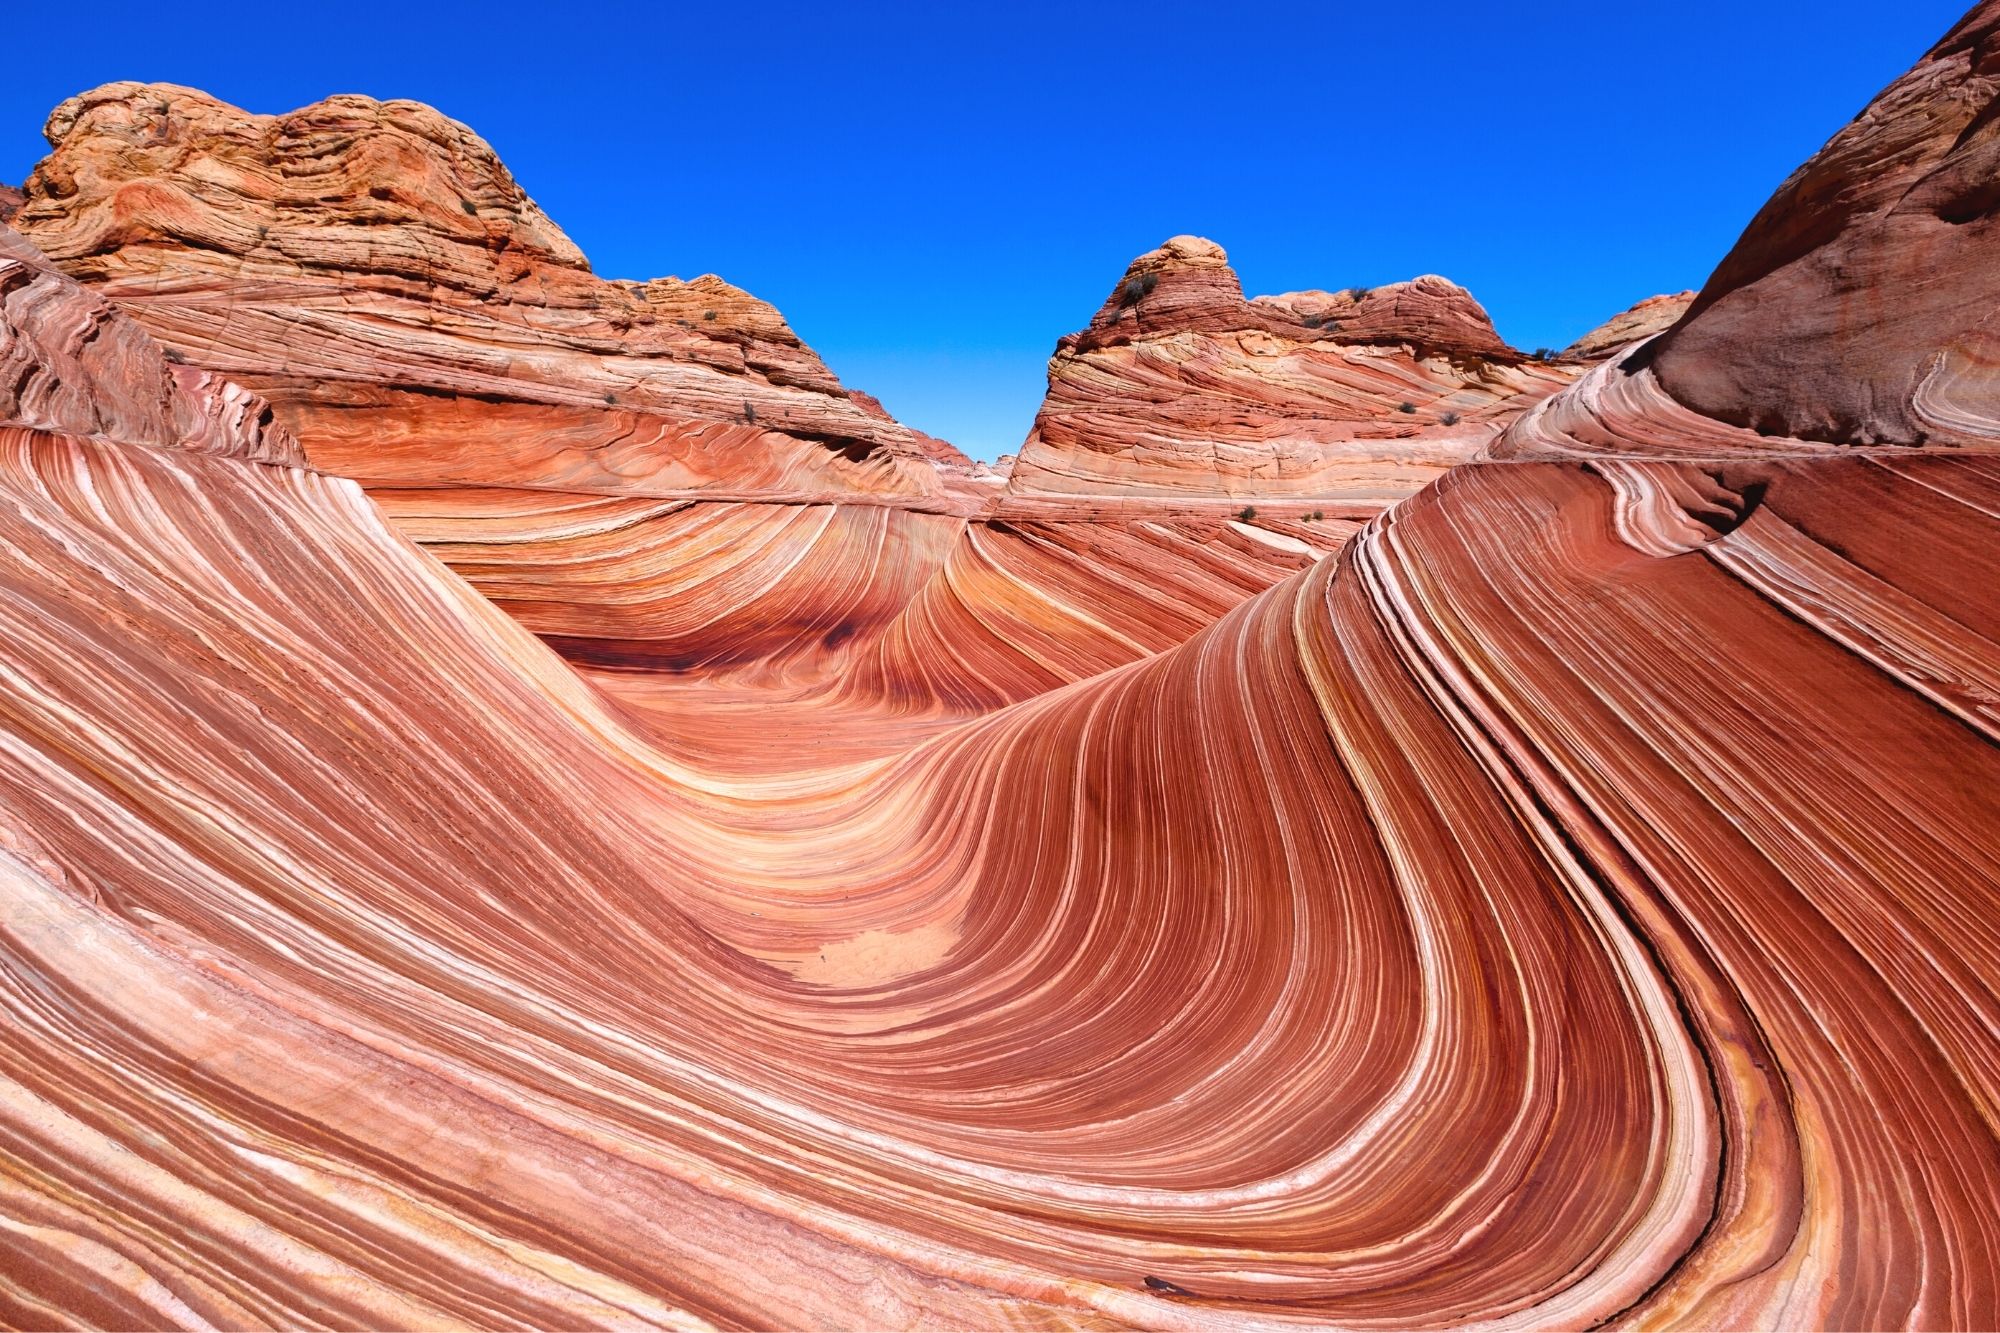 The wavy rock formation known as The Wave in Arizona